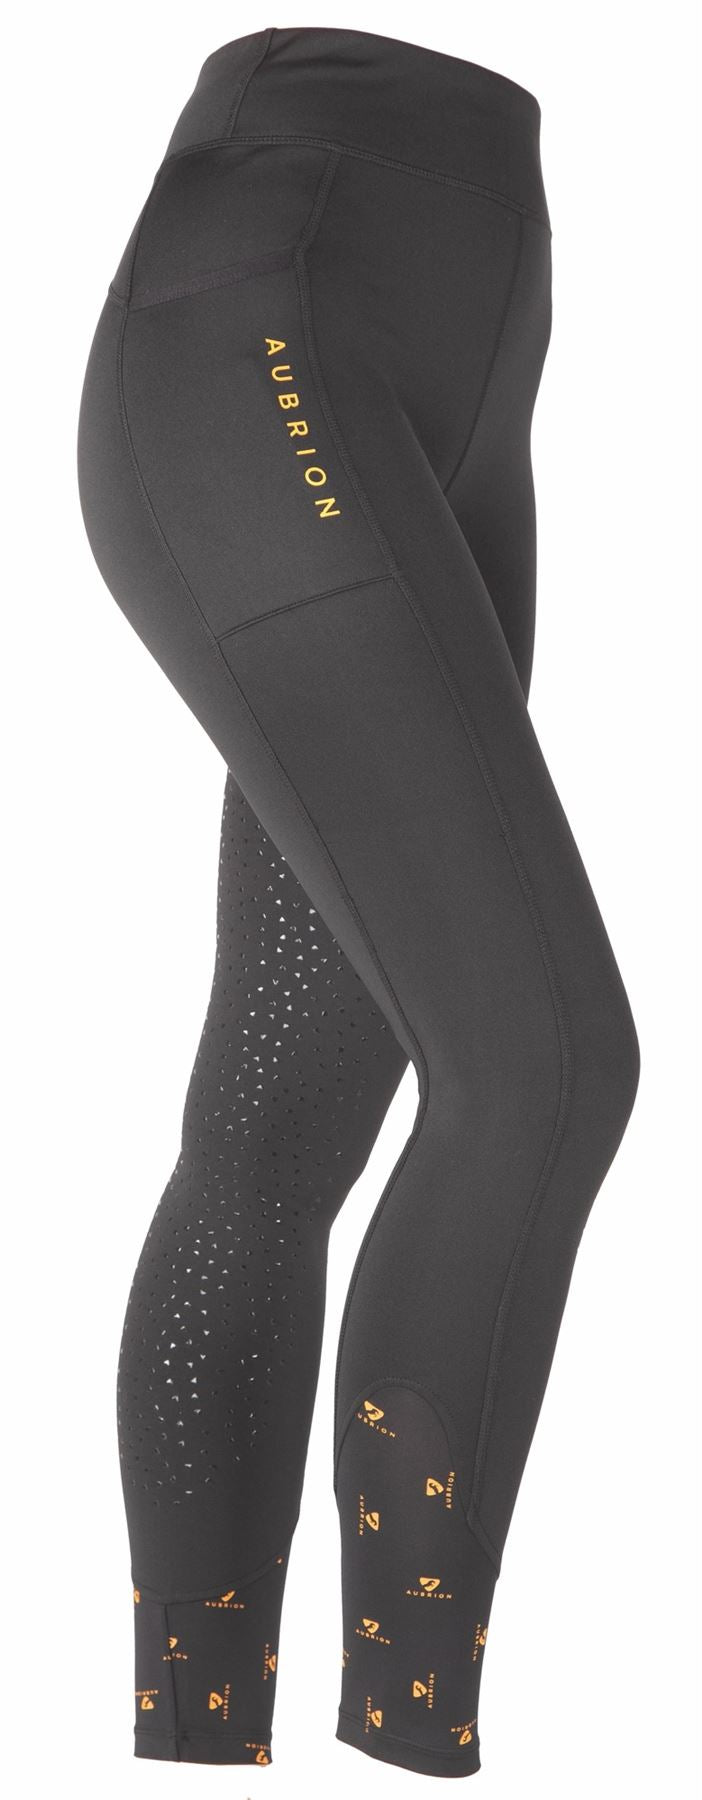 WINTER Thermal Riding Tights / Leggings pockets - COMPETITION